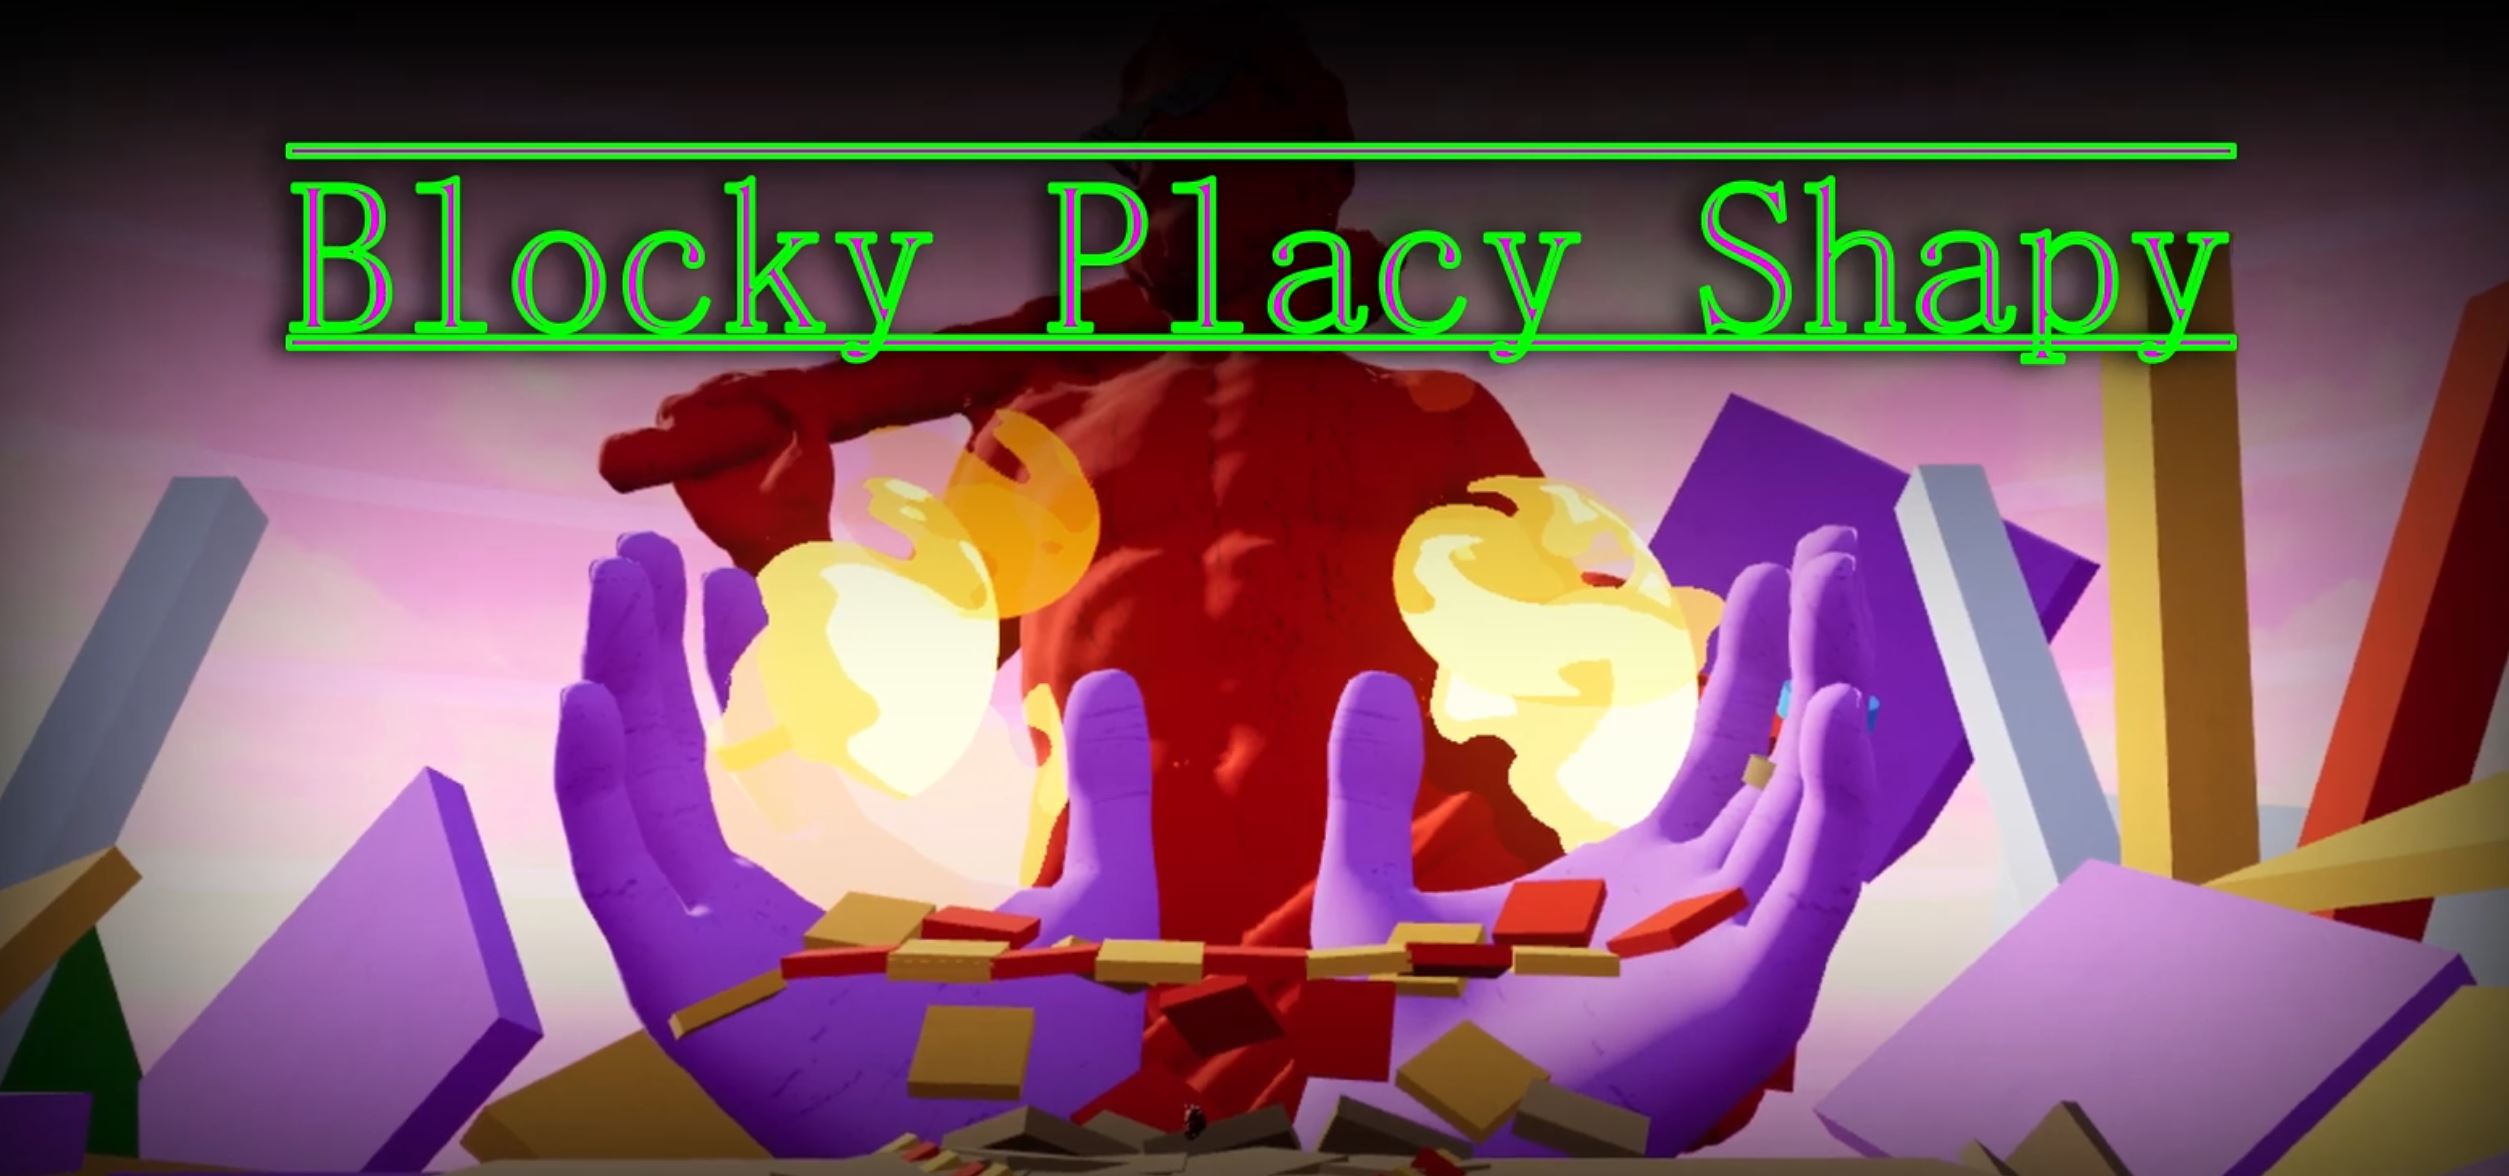 Blocky Placy Shapy (BPS) VR